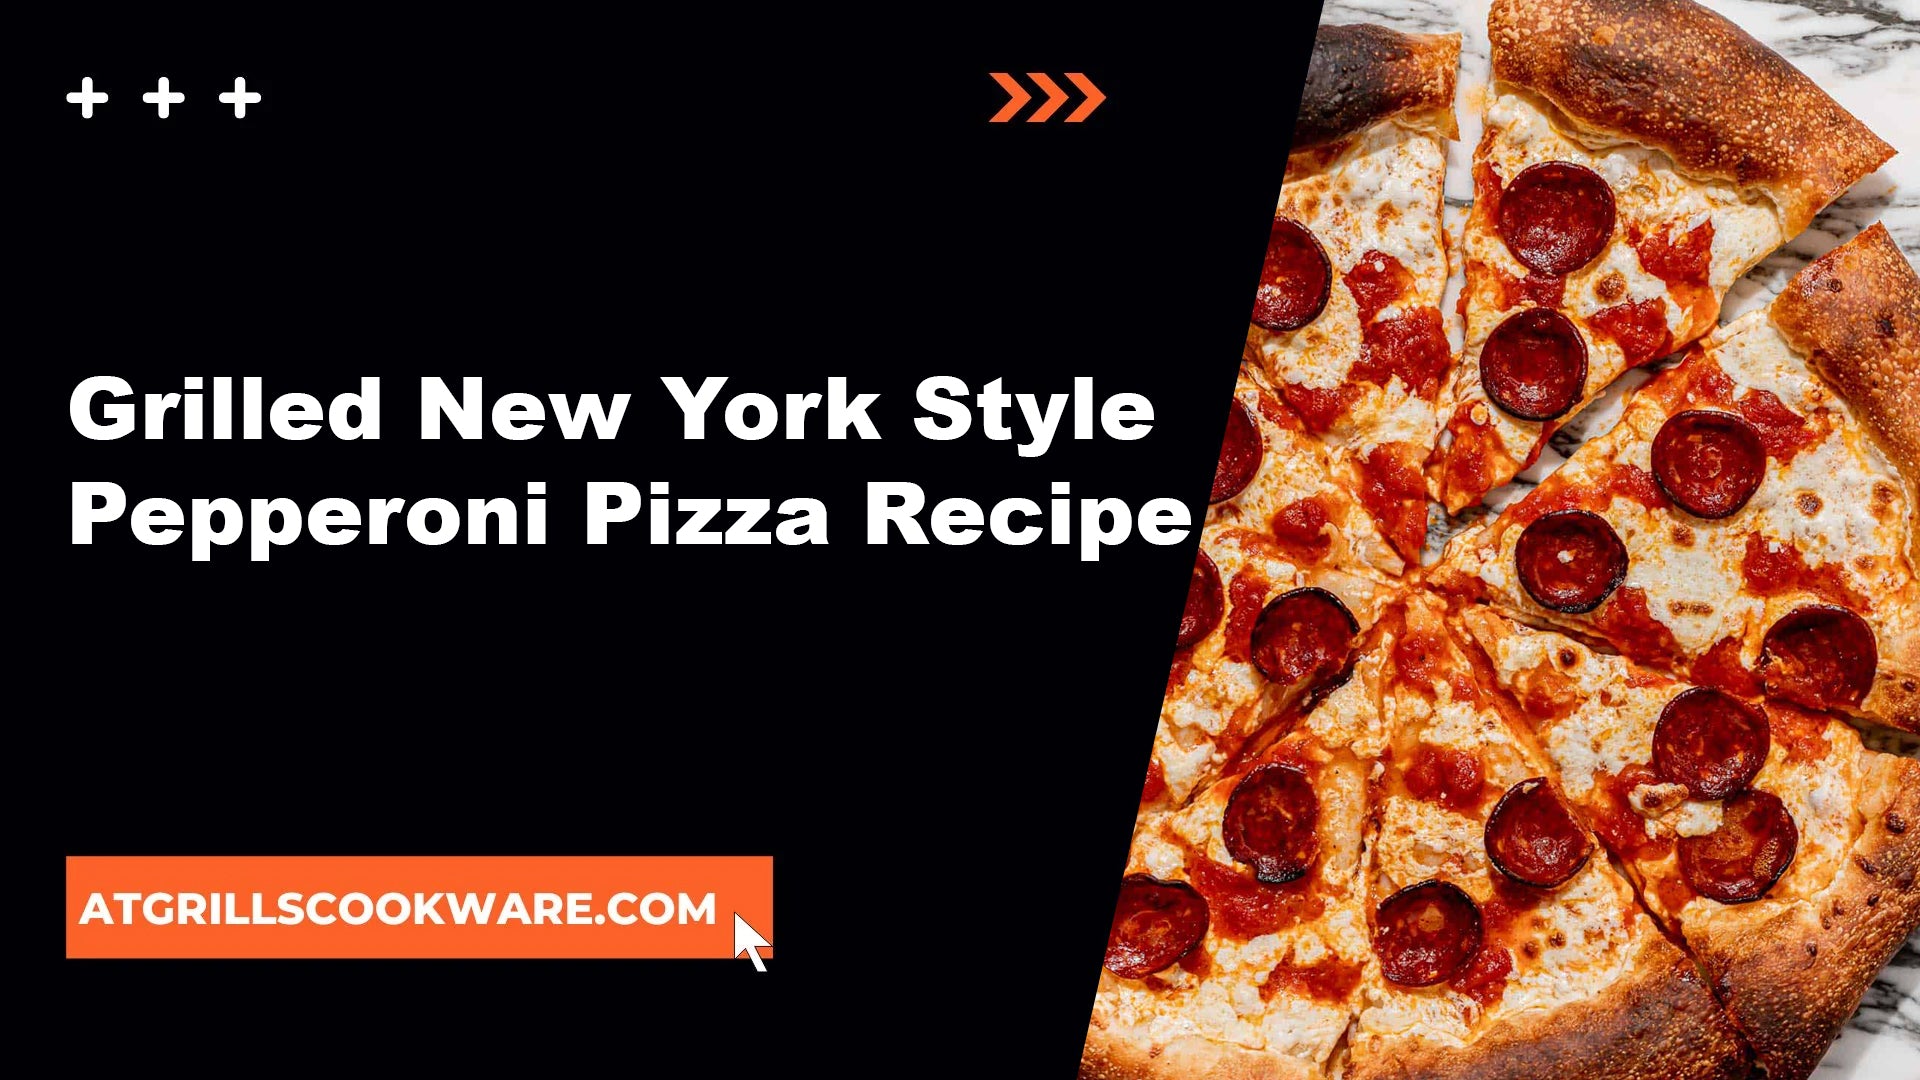 Grilled New York Style Pepperoni Pizza Recipe